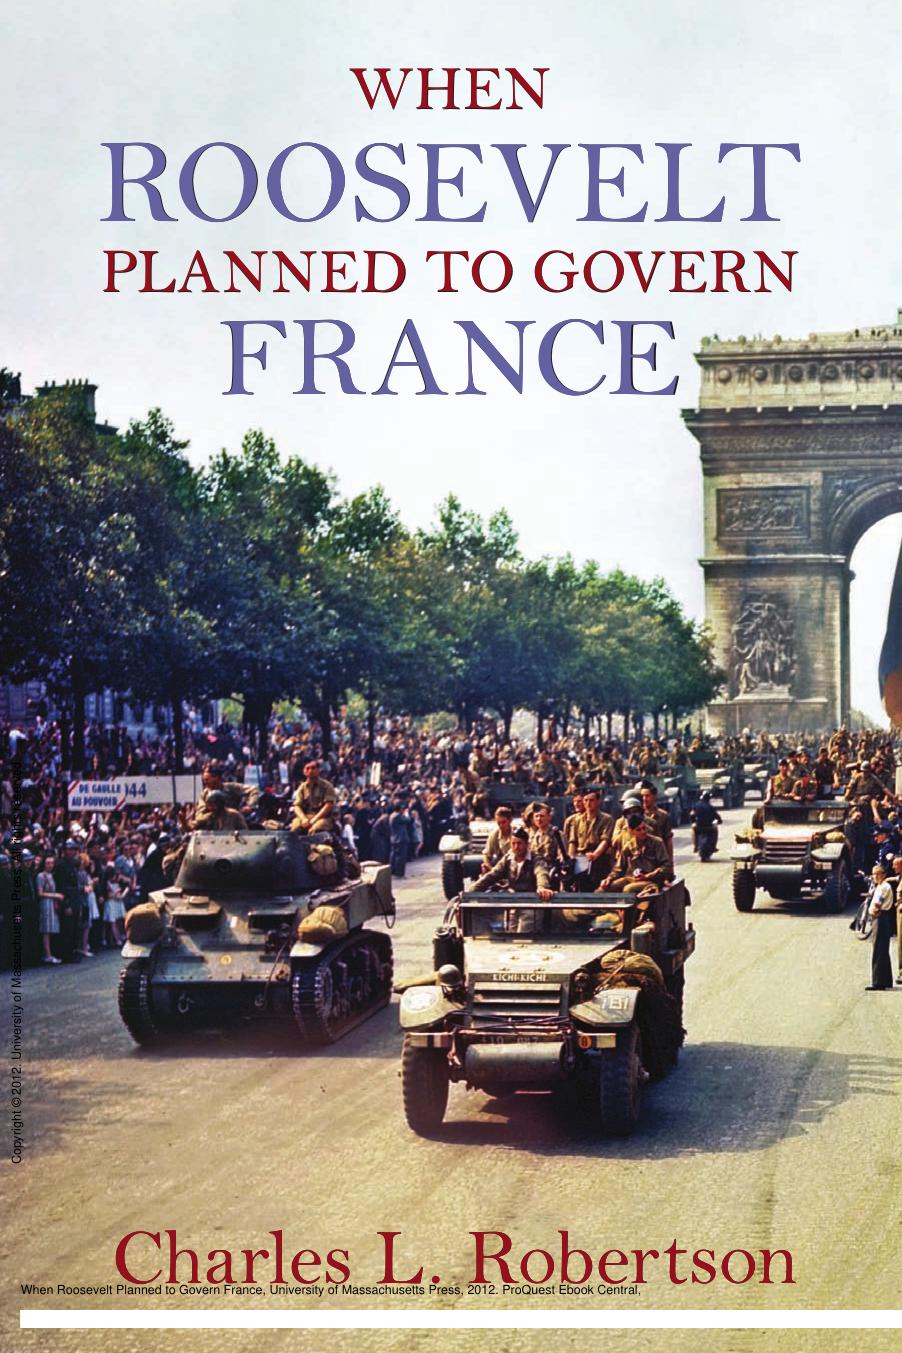 When Roosevelt Planned to Govern France by Charles L. Robertson